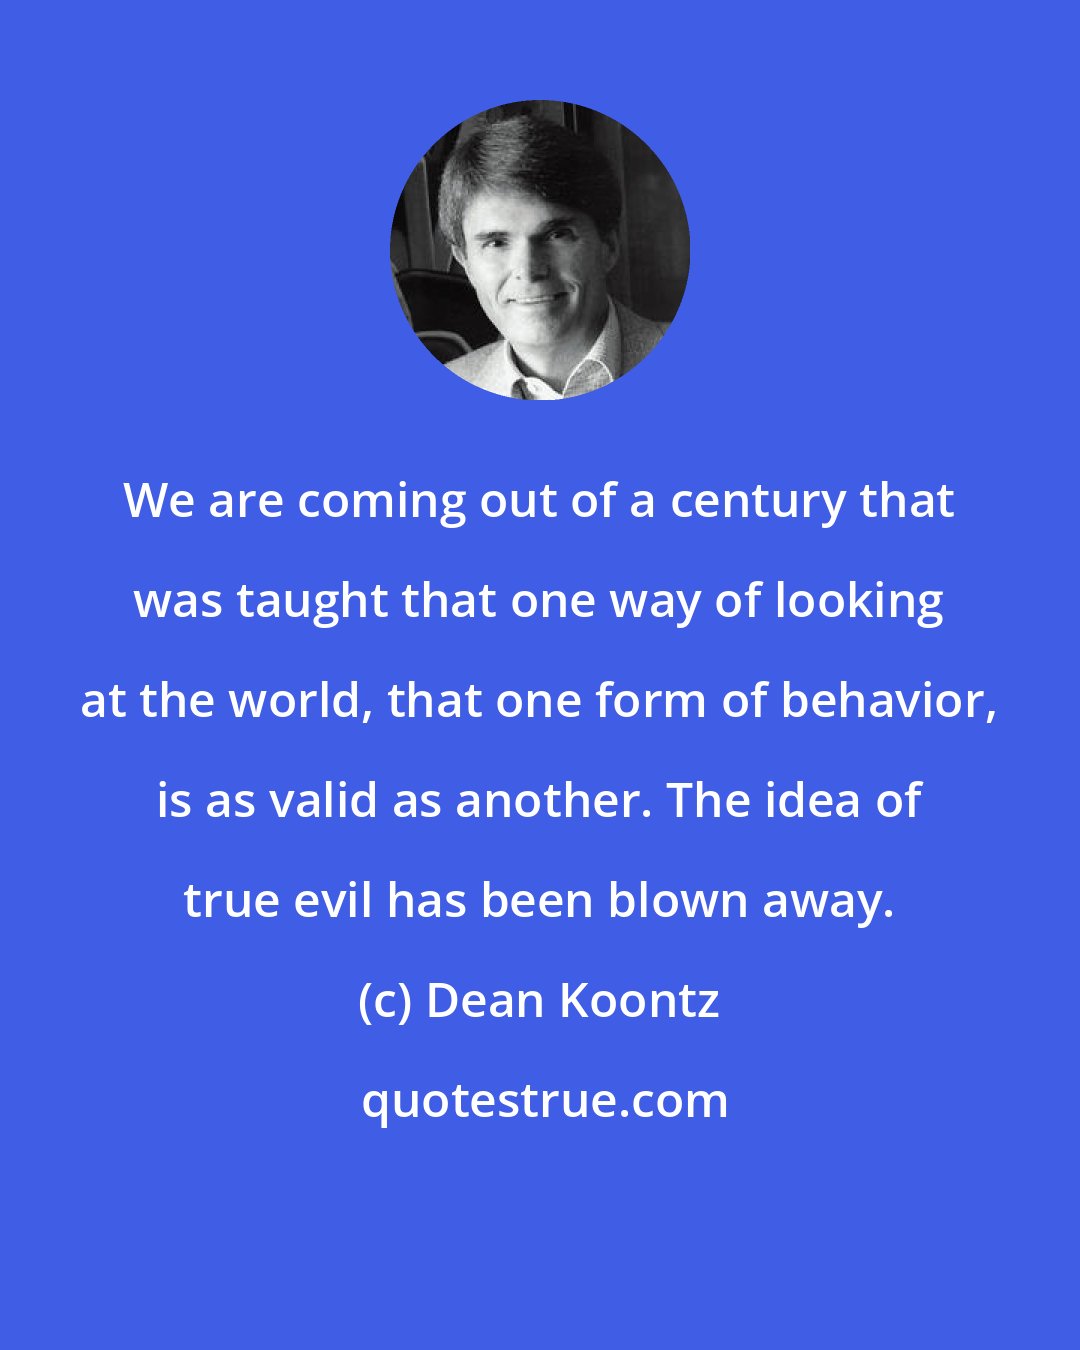 Dean Koontz: We are coming out of a century that was taught that one way of looking at the world, that one form of behavior, is as valid as another. The idea of true evil has been blown away.